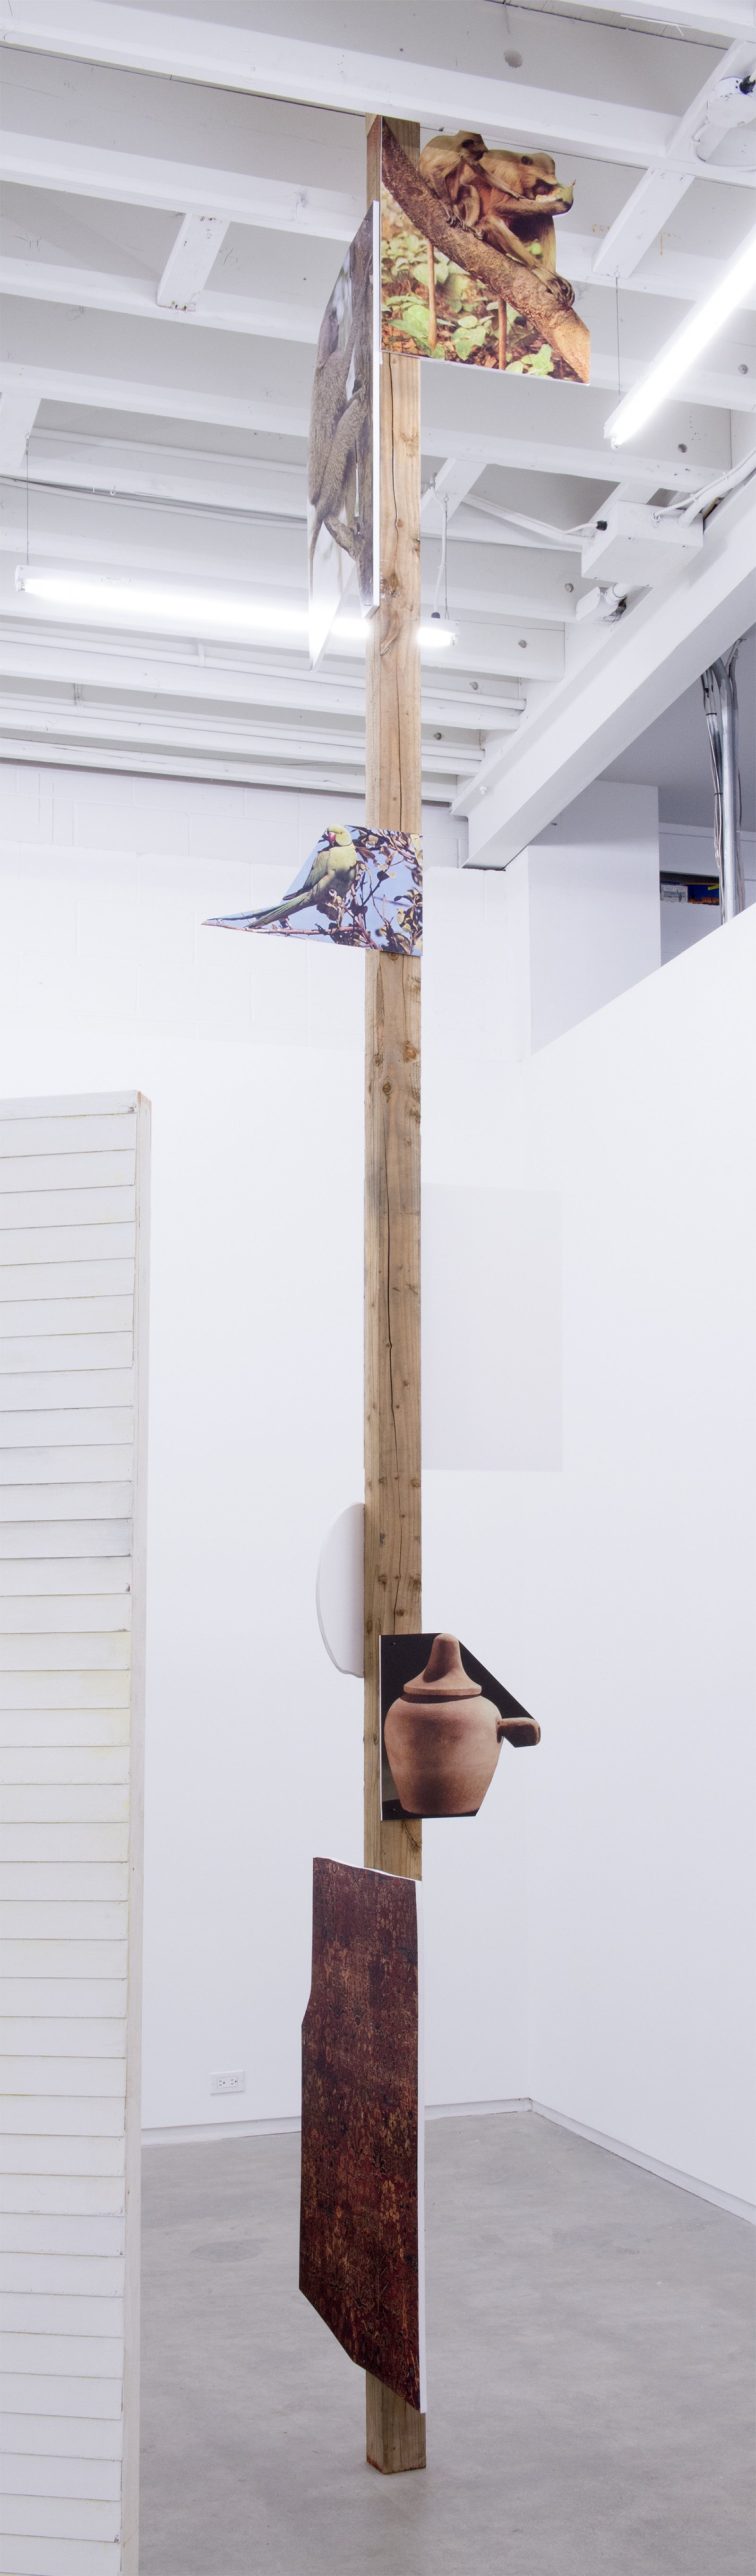 Geoffrey Farmer, This is where the plate goes... (detail), 2014, douglas fir pole, 7 photographs mounted on foamcore, plastic topiary, 2 wooden wall façades, paint, window, sandbags, framed ink and cut-outs mounted on paper, dimensions variable by Geoffrey Farmer